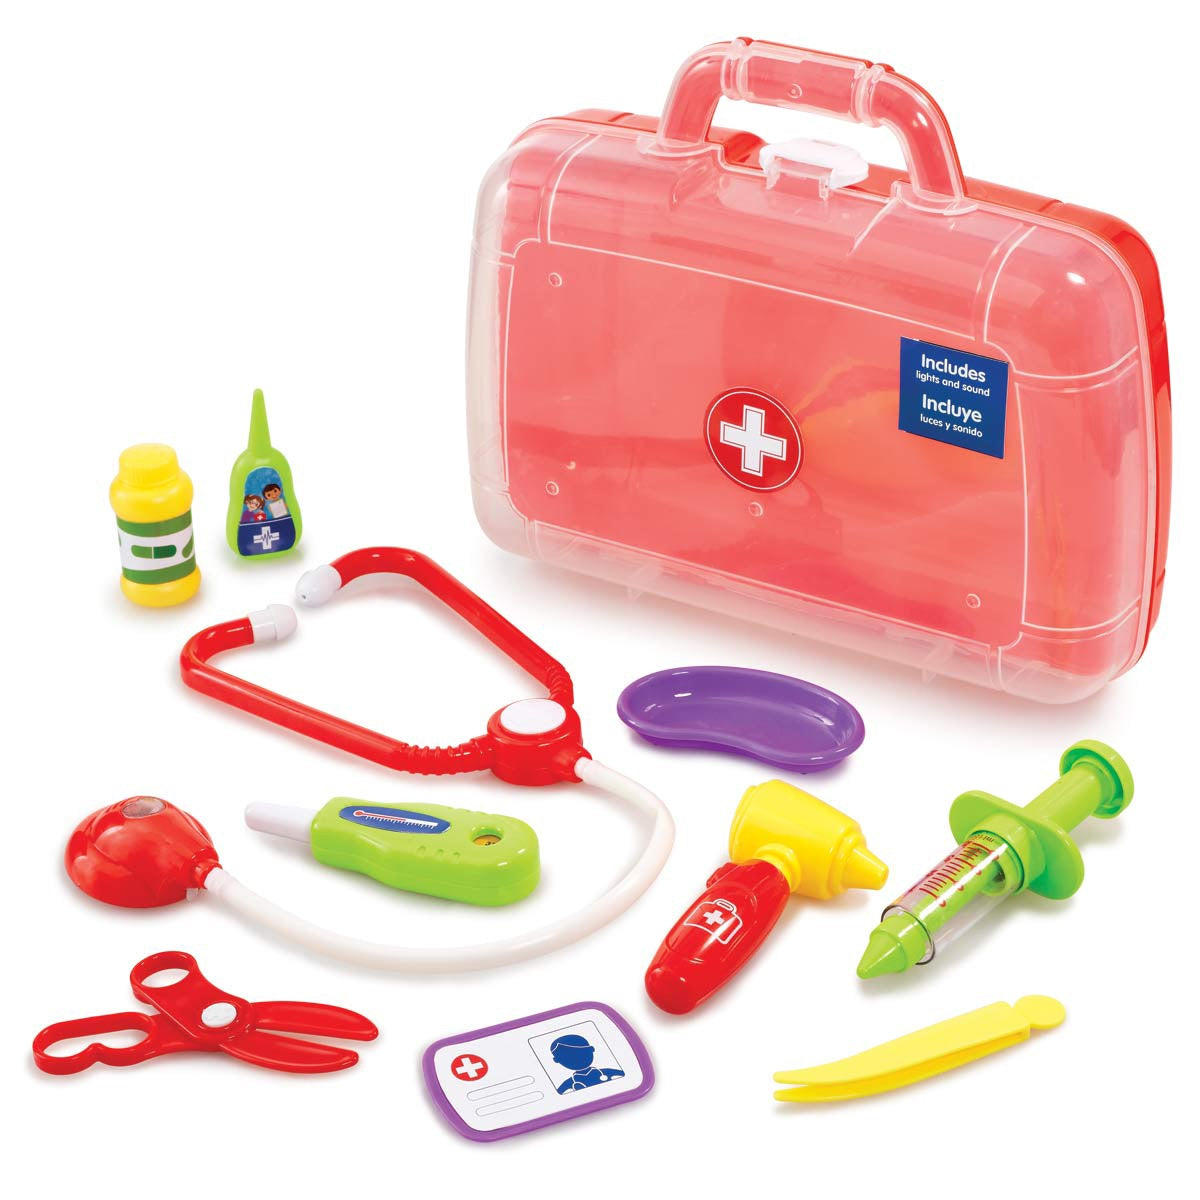 Busy Me My Medical Case Playset